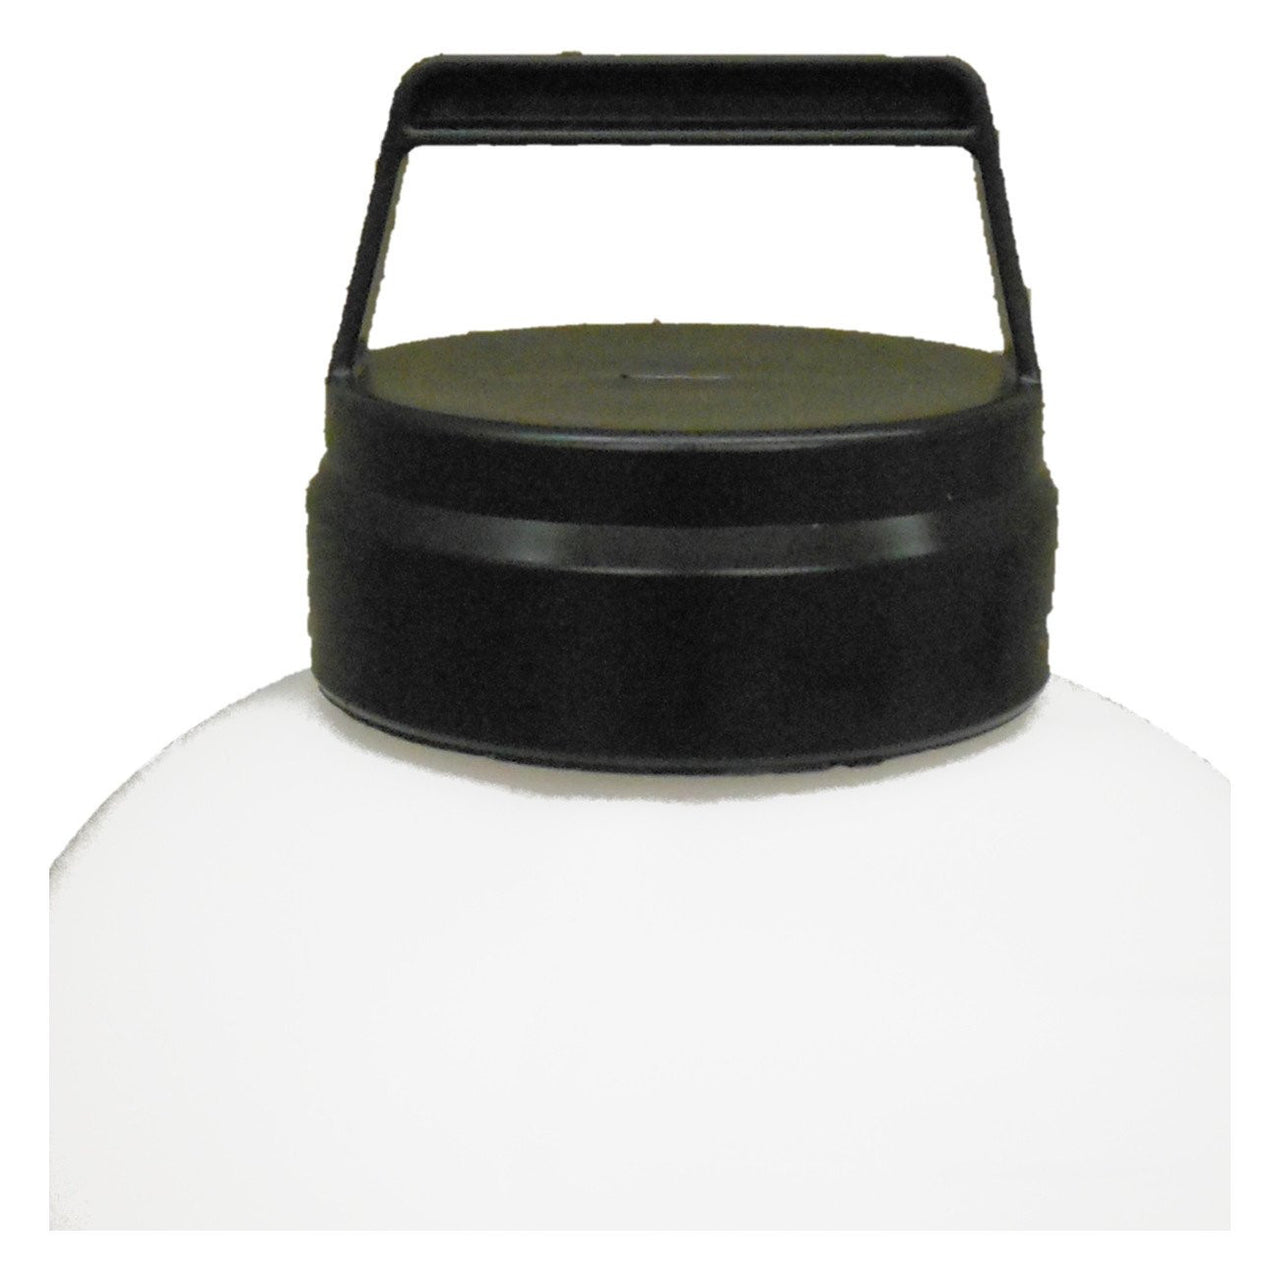 Millside Screw On Cap/handle For Top Fill Fountains - Poultry Waterers Plastic Millside - Canada